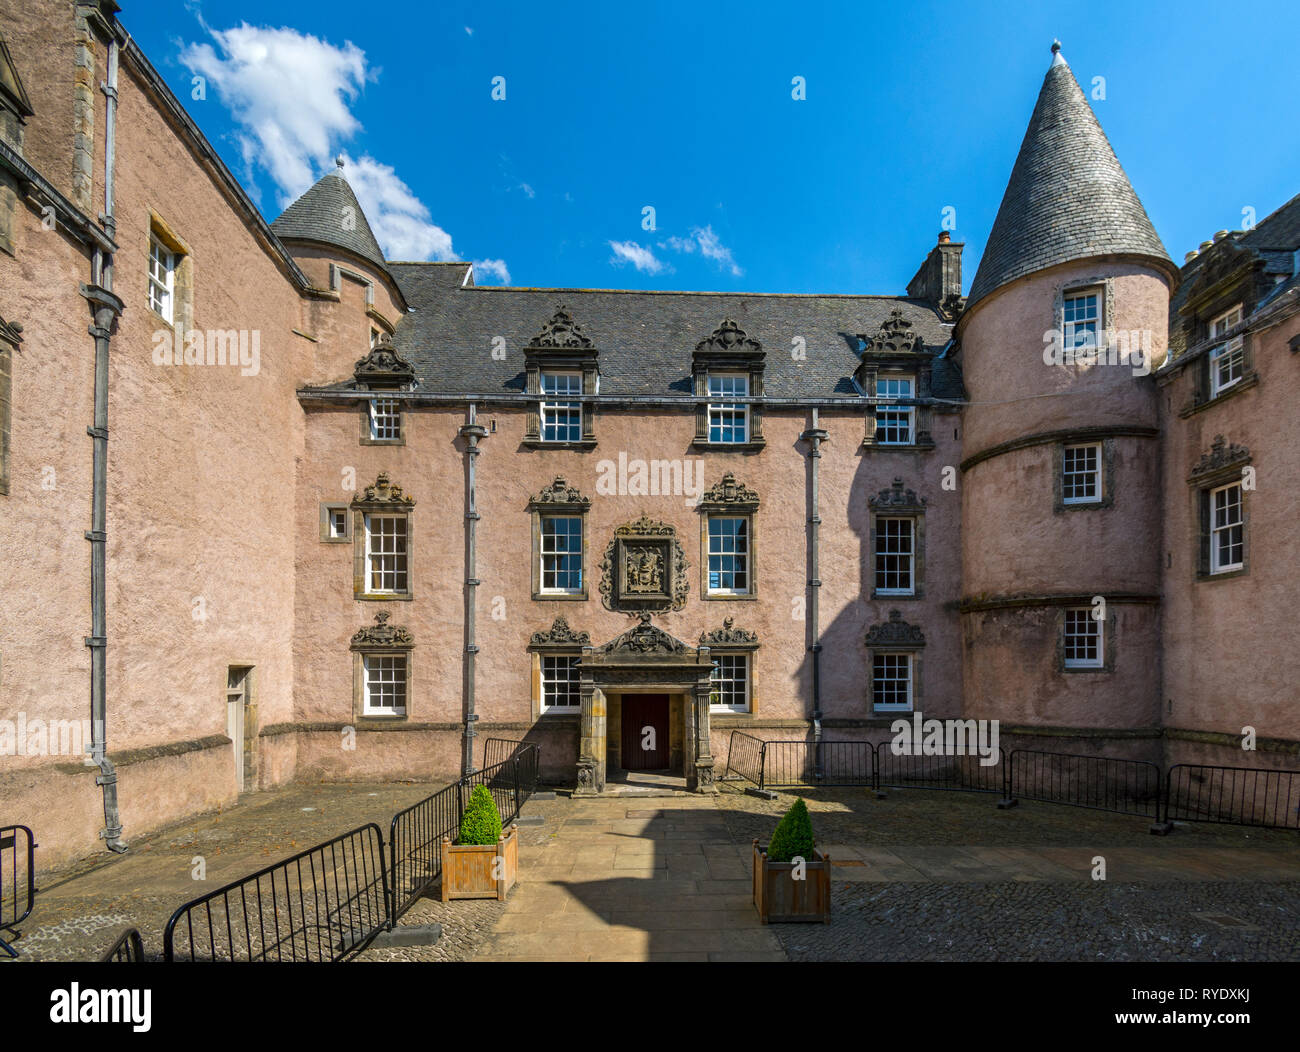 The Argyll's Lodging building from the courtyard, Stirling, Stirlingshire, Scotland, UK Stock Photo